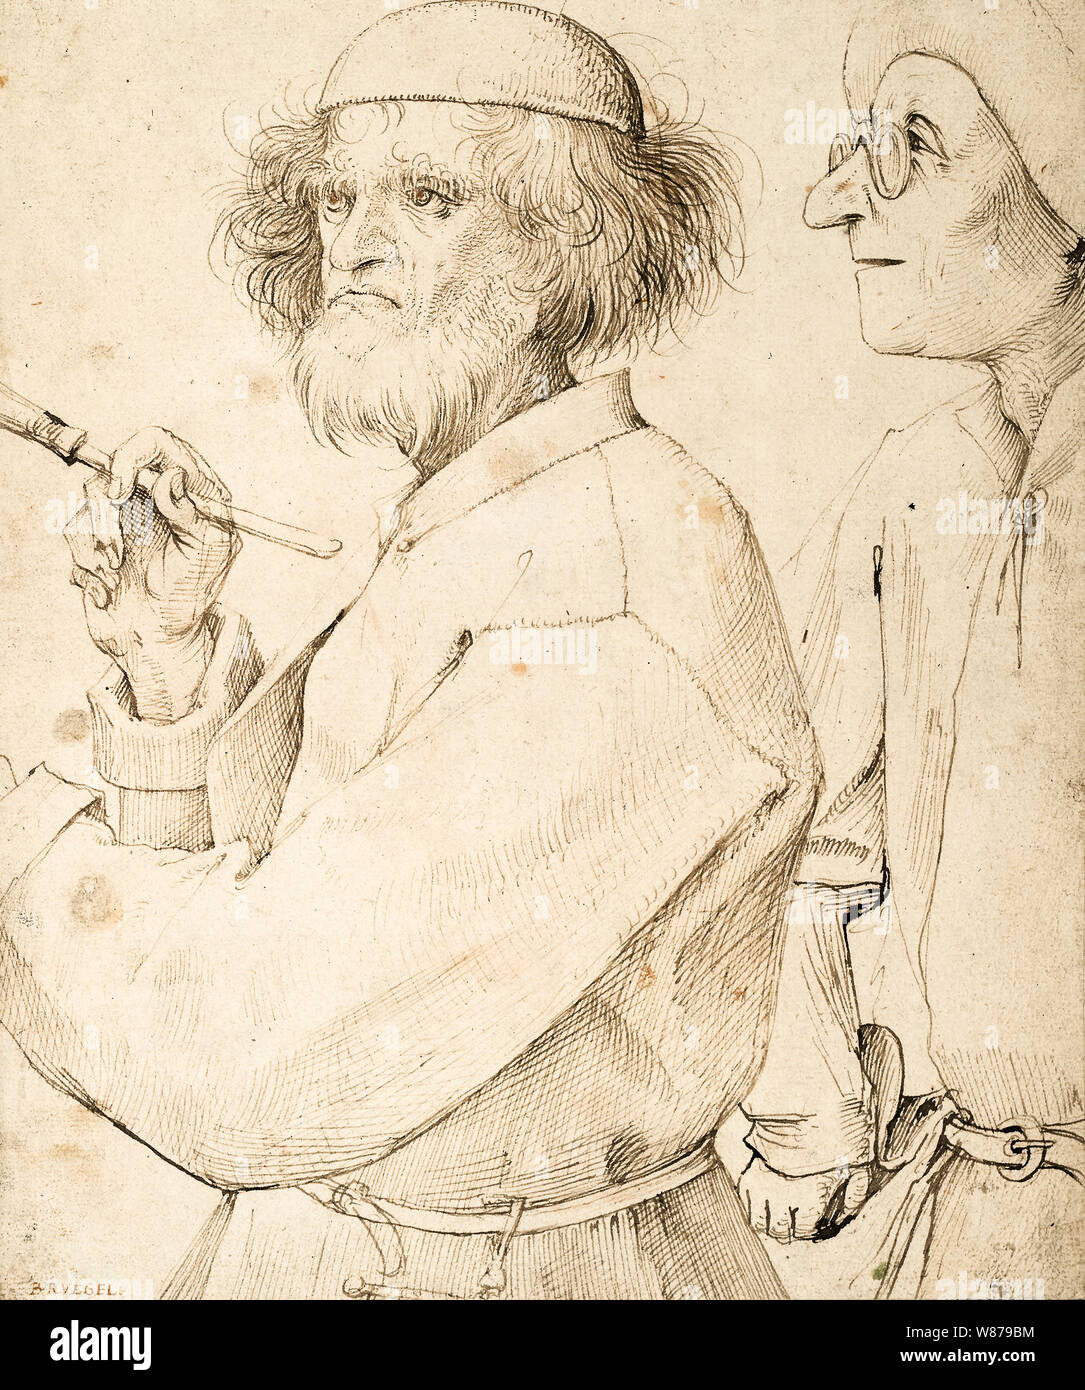 Pieter Bruegel the Elder, The Painter and the Buyer, portrait of the artist, drawing, circa 1565 Stock Photo